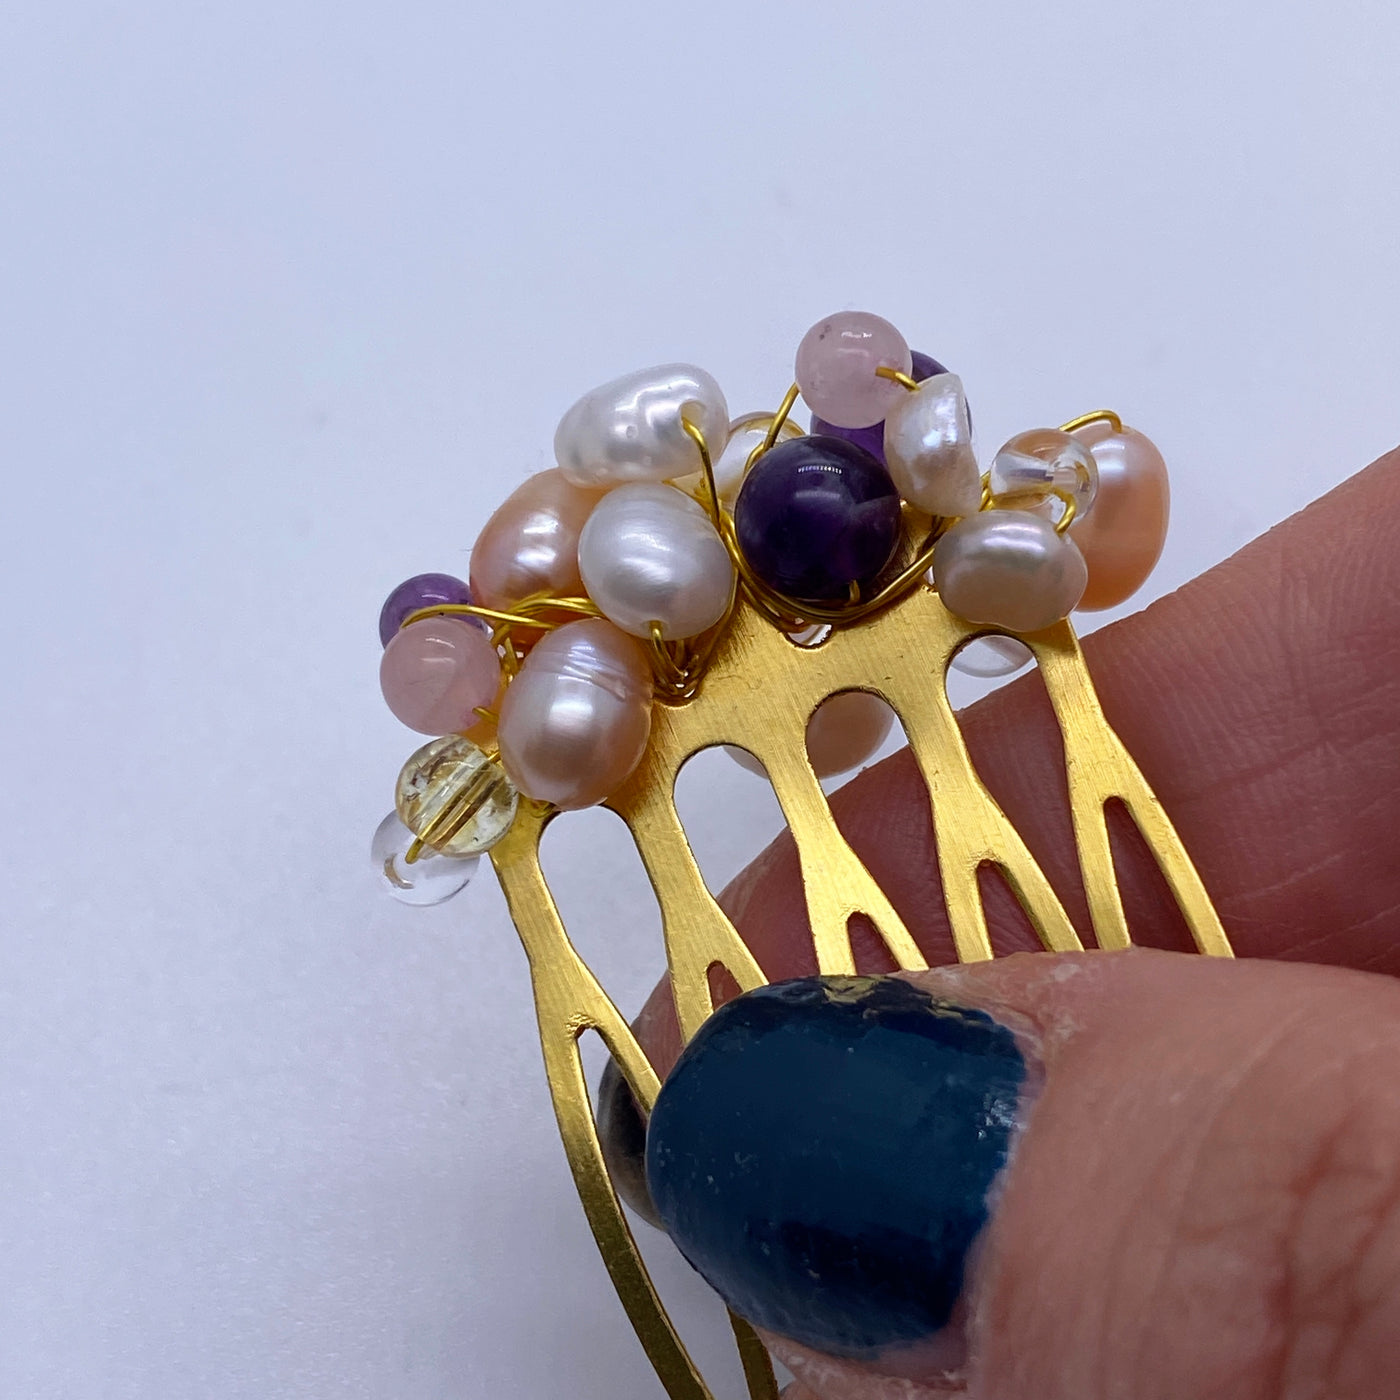 Freshwater pearls in different measures and colors (rose, white), chrystal and rose quartz beads, amethysts and golden wire for this hair combs simple tuck five teeth metal combs gold color